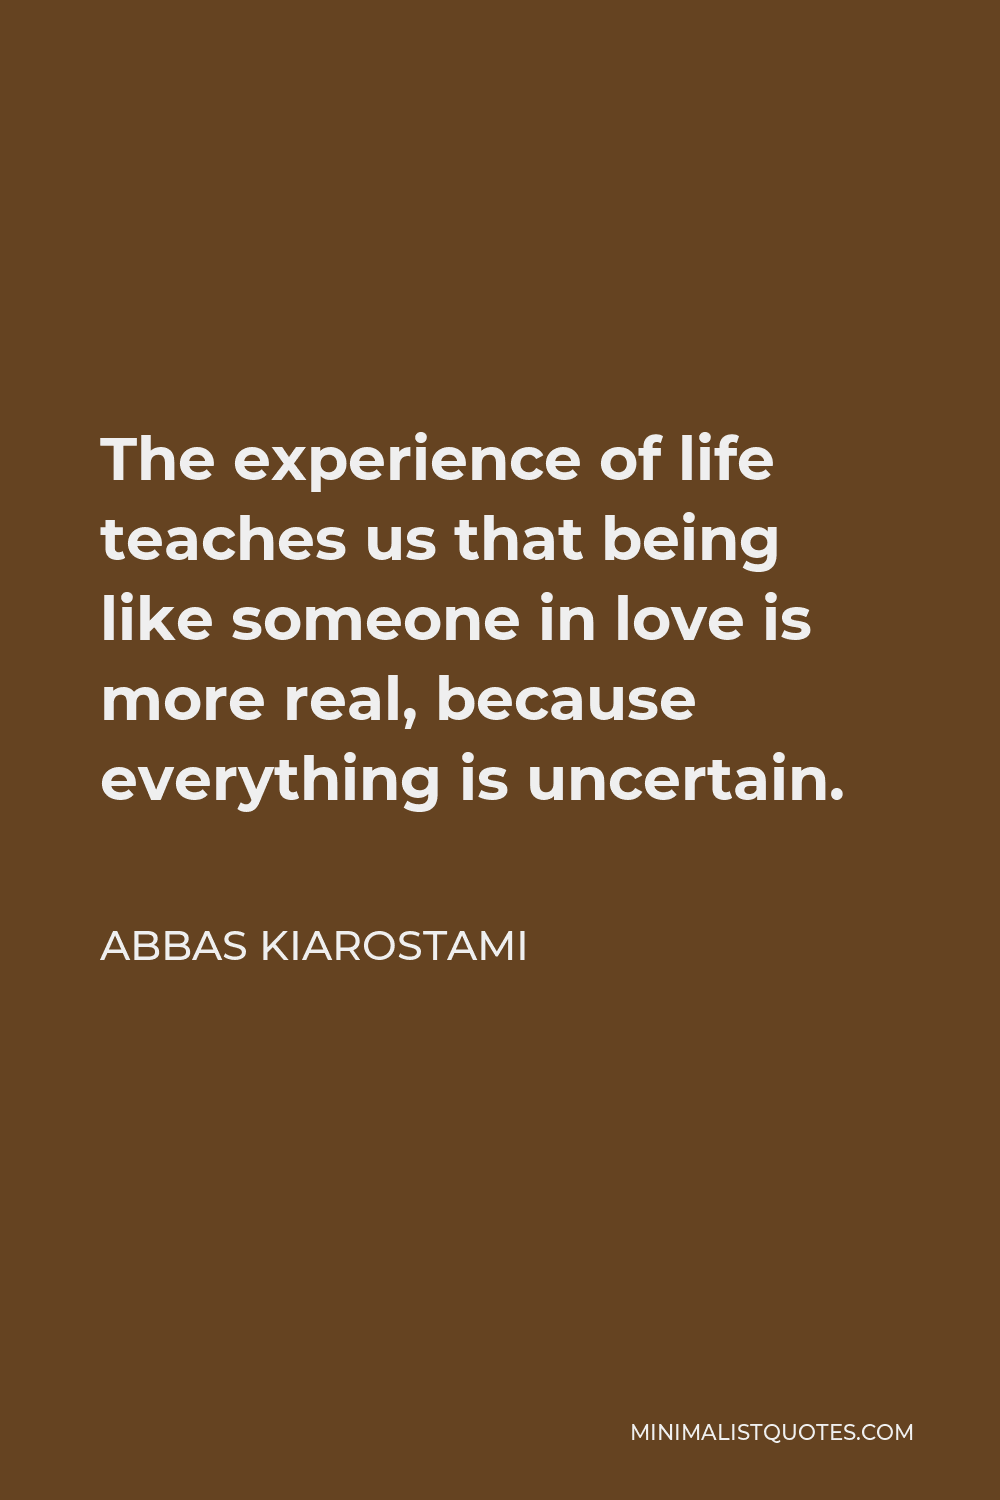 Abbas Kiarostami Quote - The experience of life teaches us that being like someone in love is more real, because everything is uncertain.